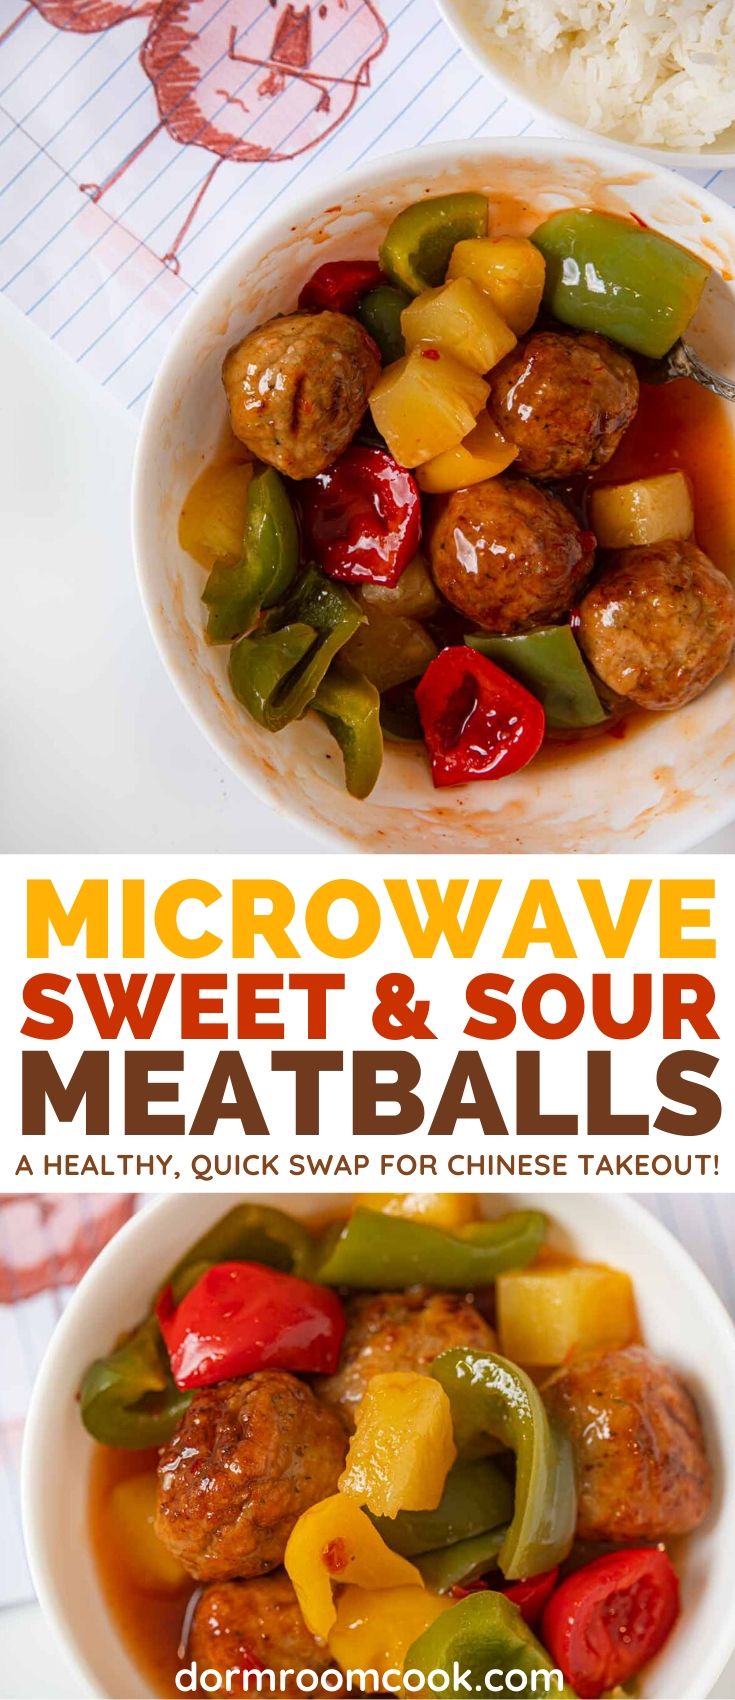 Microwave Sweet and Sour Meatballs!